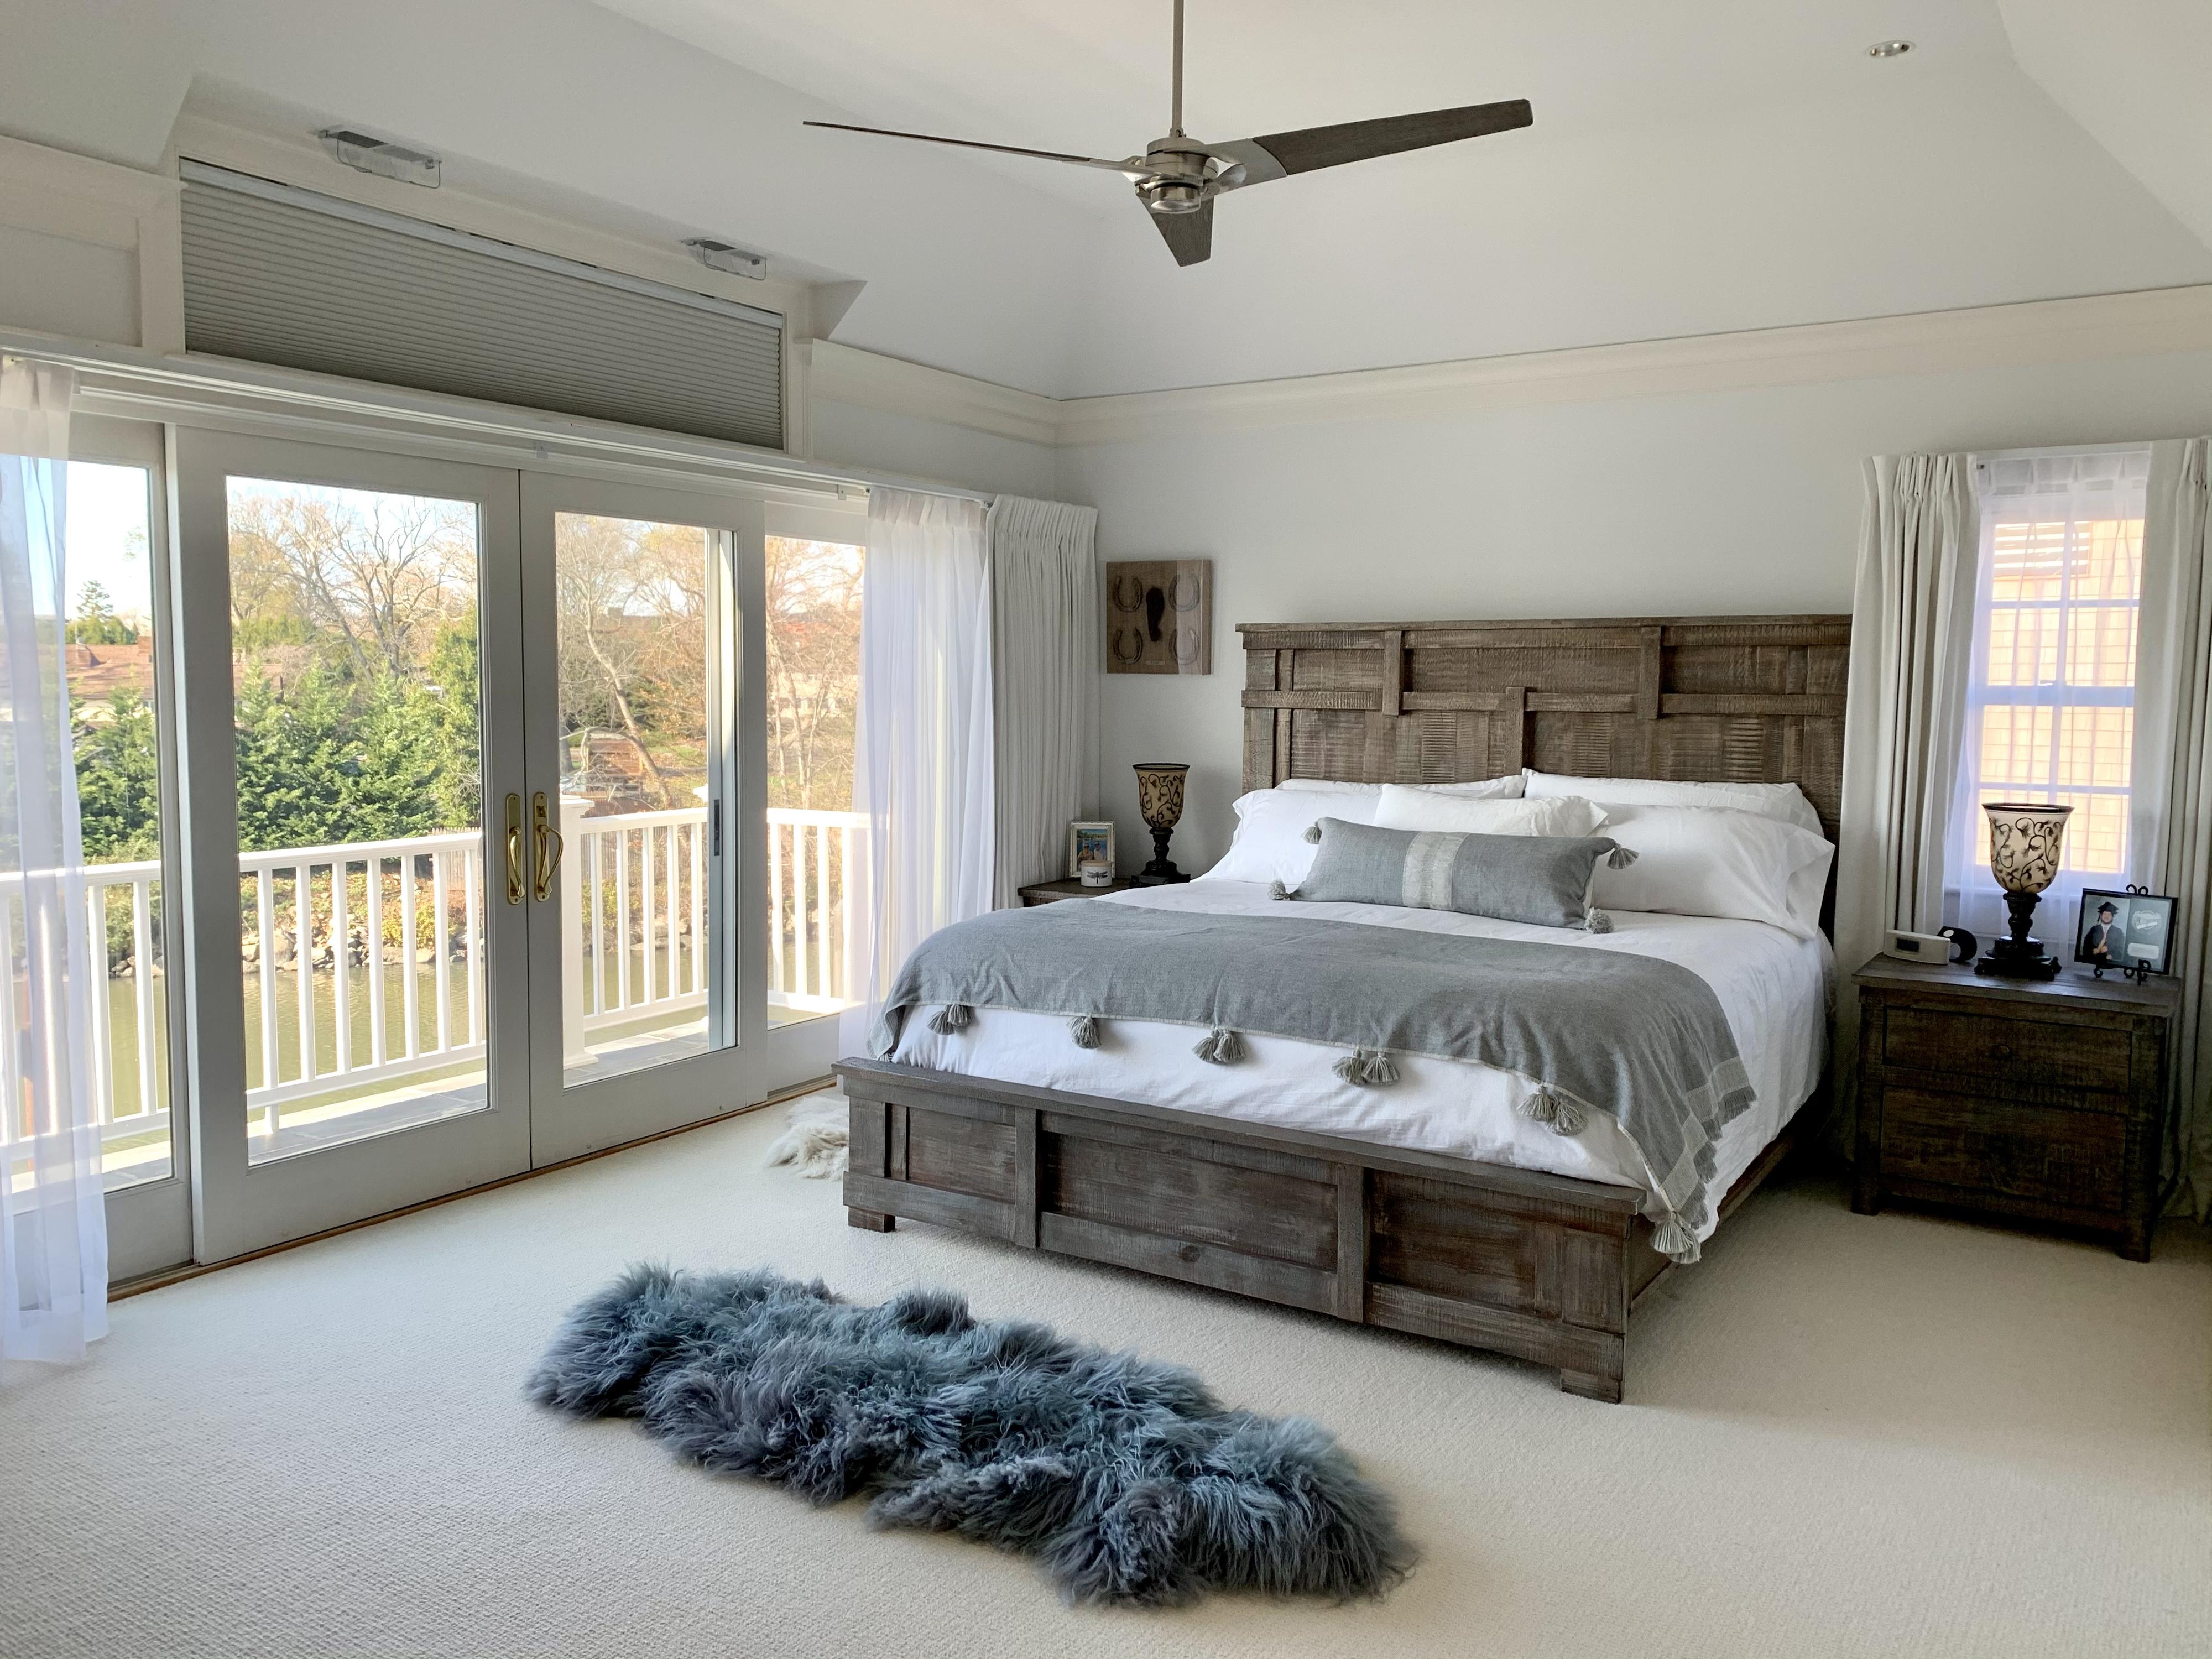 A well-lit bedroom with a large bed, wooden furniture, carpeting, and balcony doors